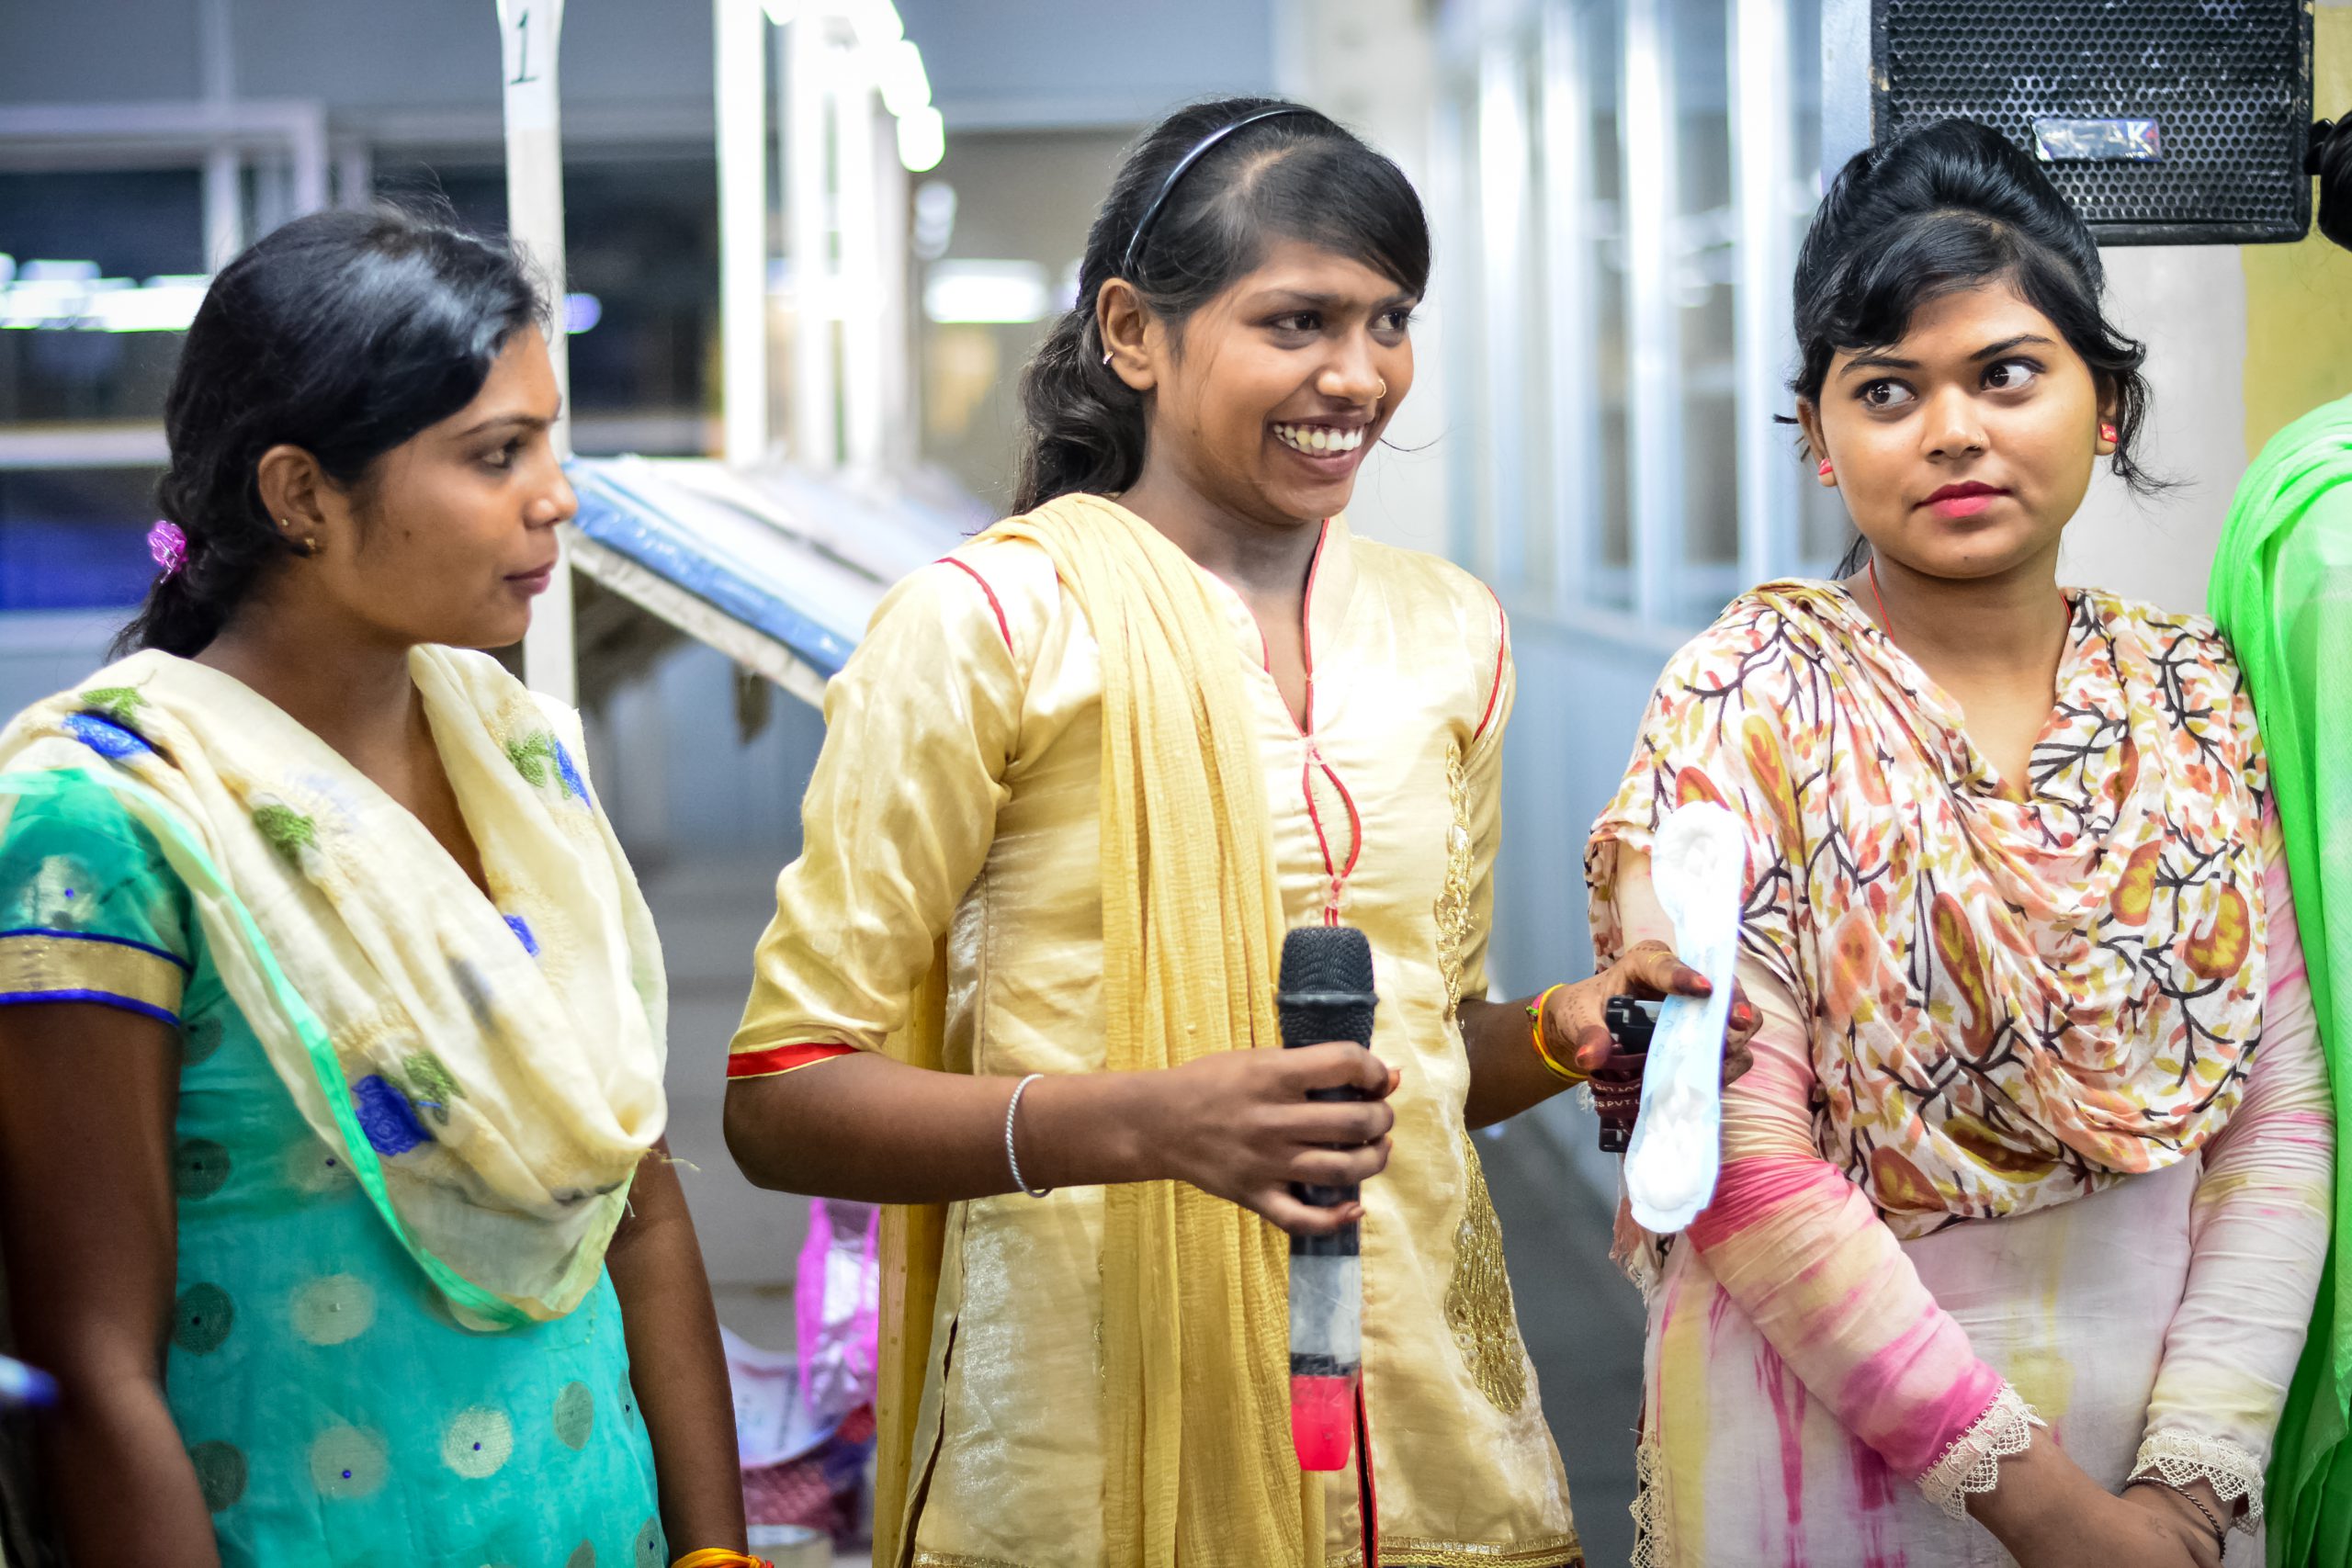 By Women, For Women: How We Co-created A Menstrual Hygiene Management Program With Our Female Workforce